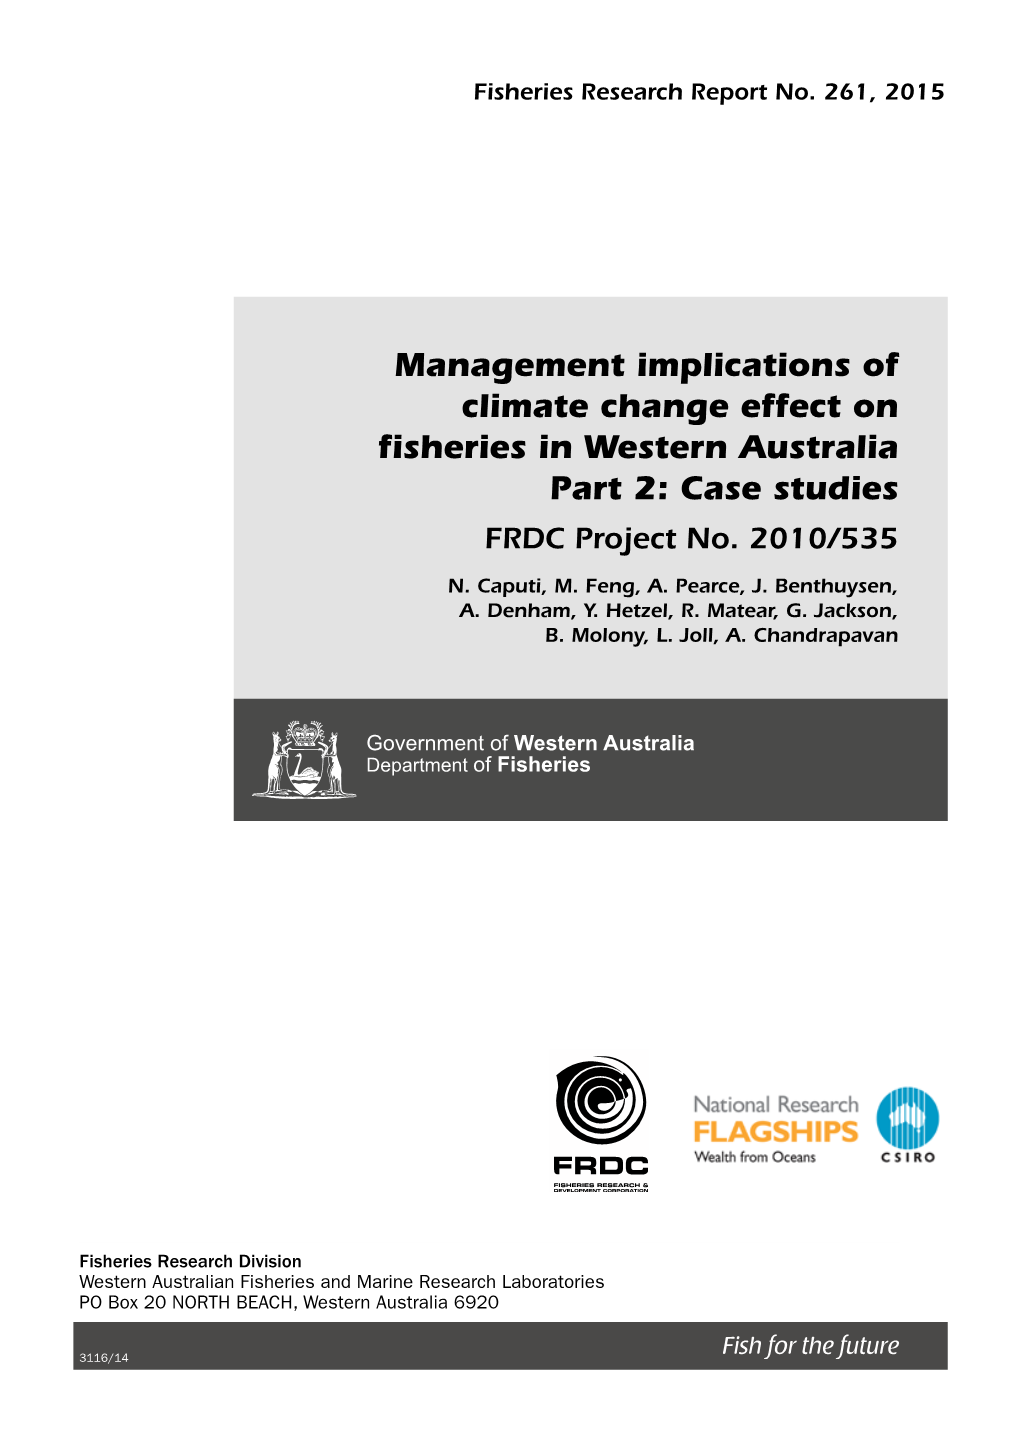 Management Implications of Climate Change Effect on Fisheries in Western Australia Part 2: Case Studies FRDC Project No